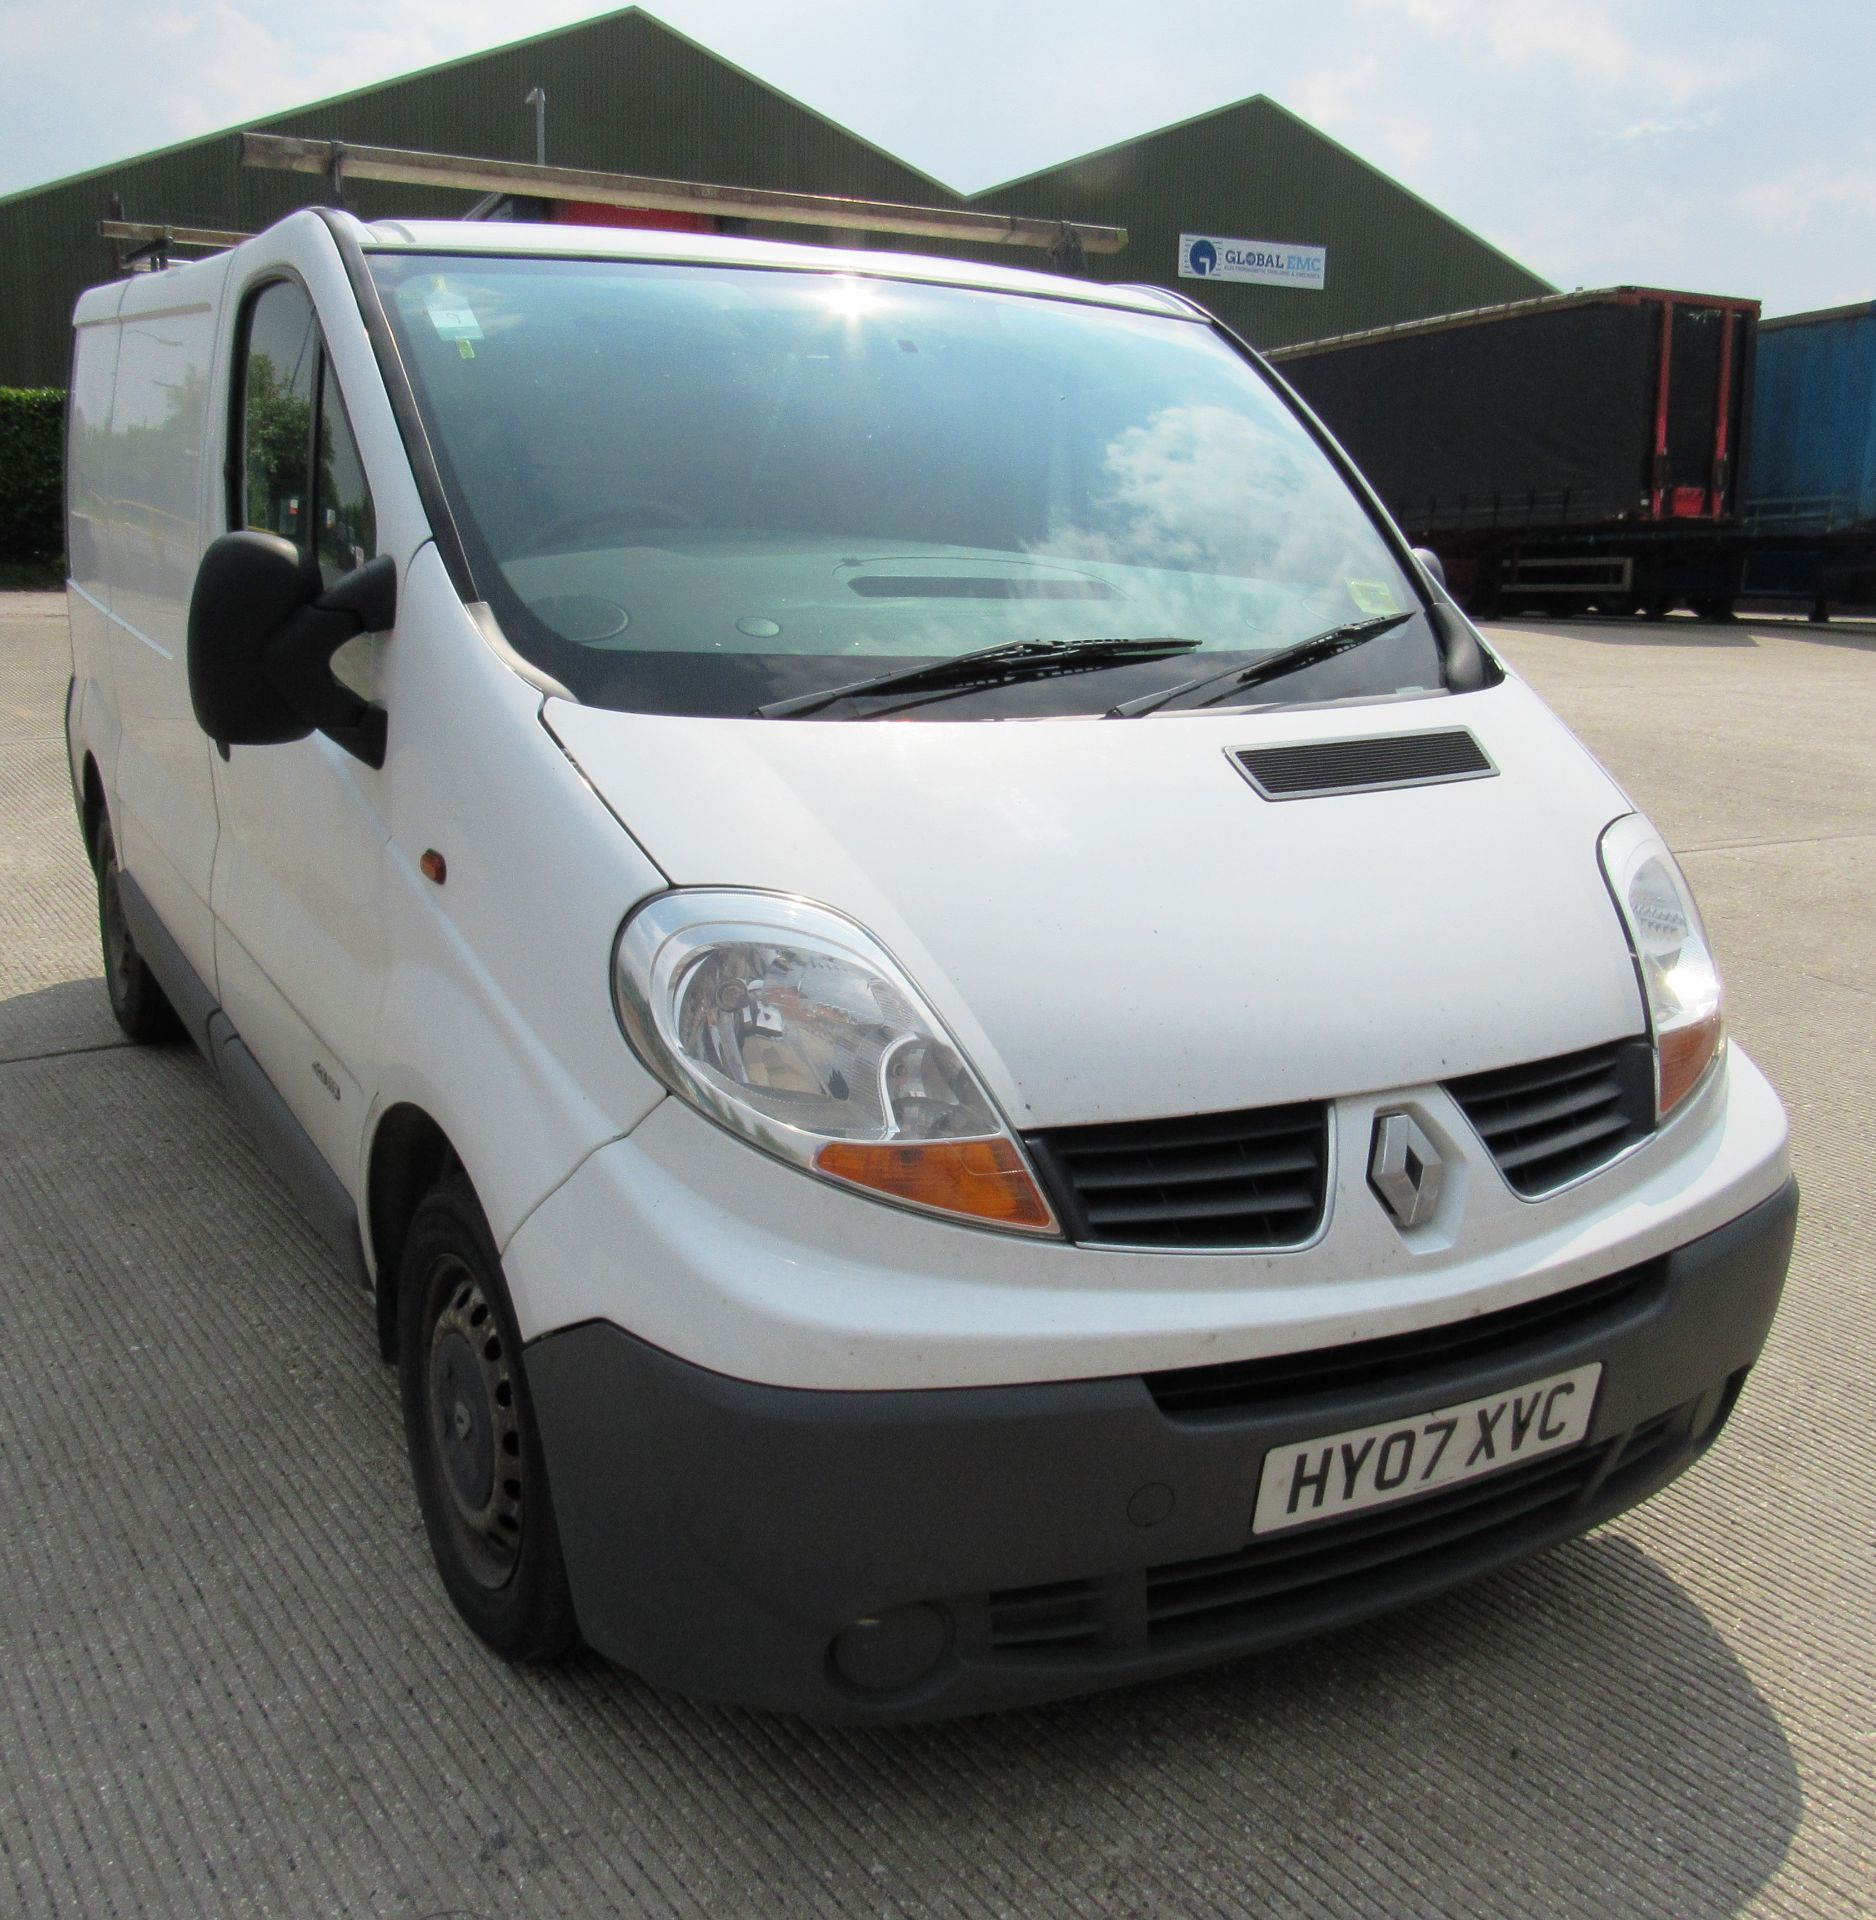 Renault Trafic SL27+ DCI 115 Panel Van, registration HY07 XVC, first registered 21 March 2007, MOT - Image 2 of 10